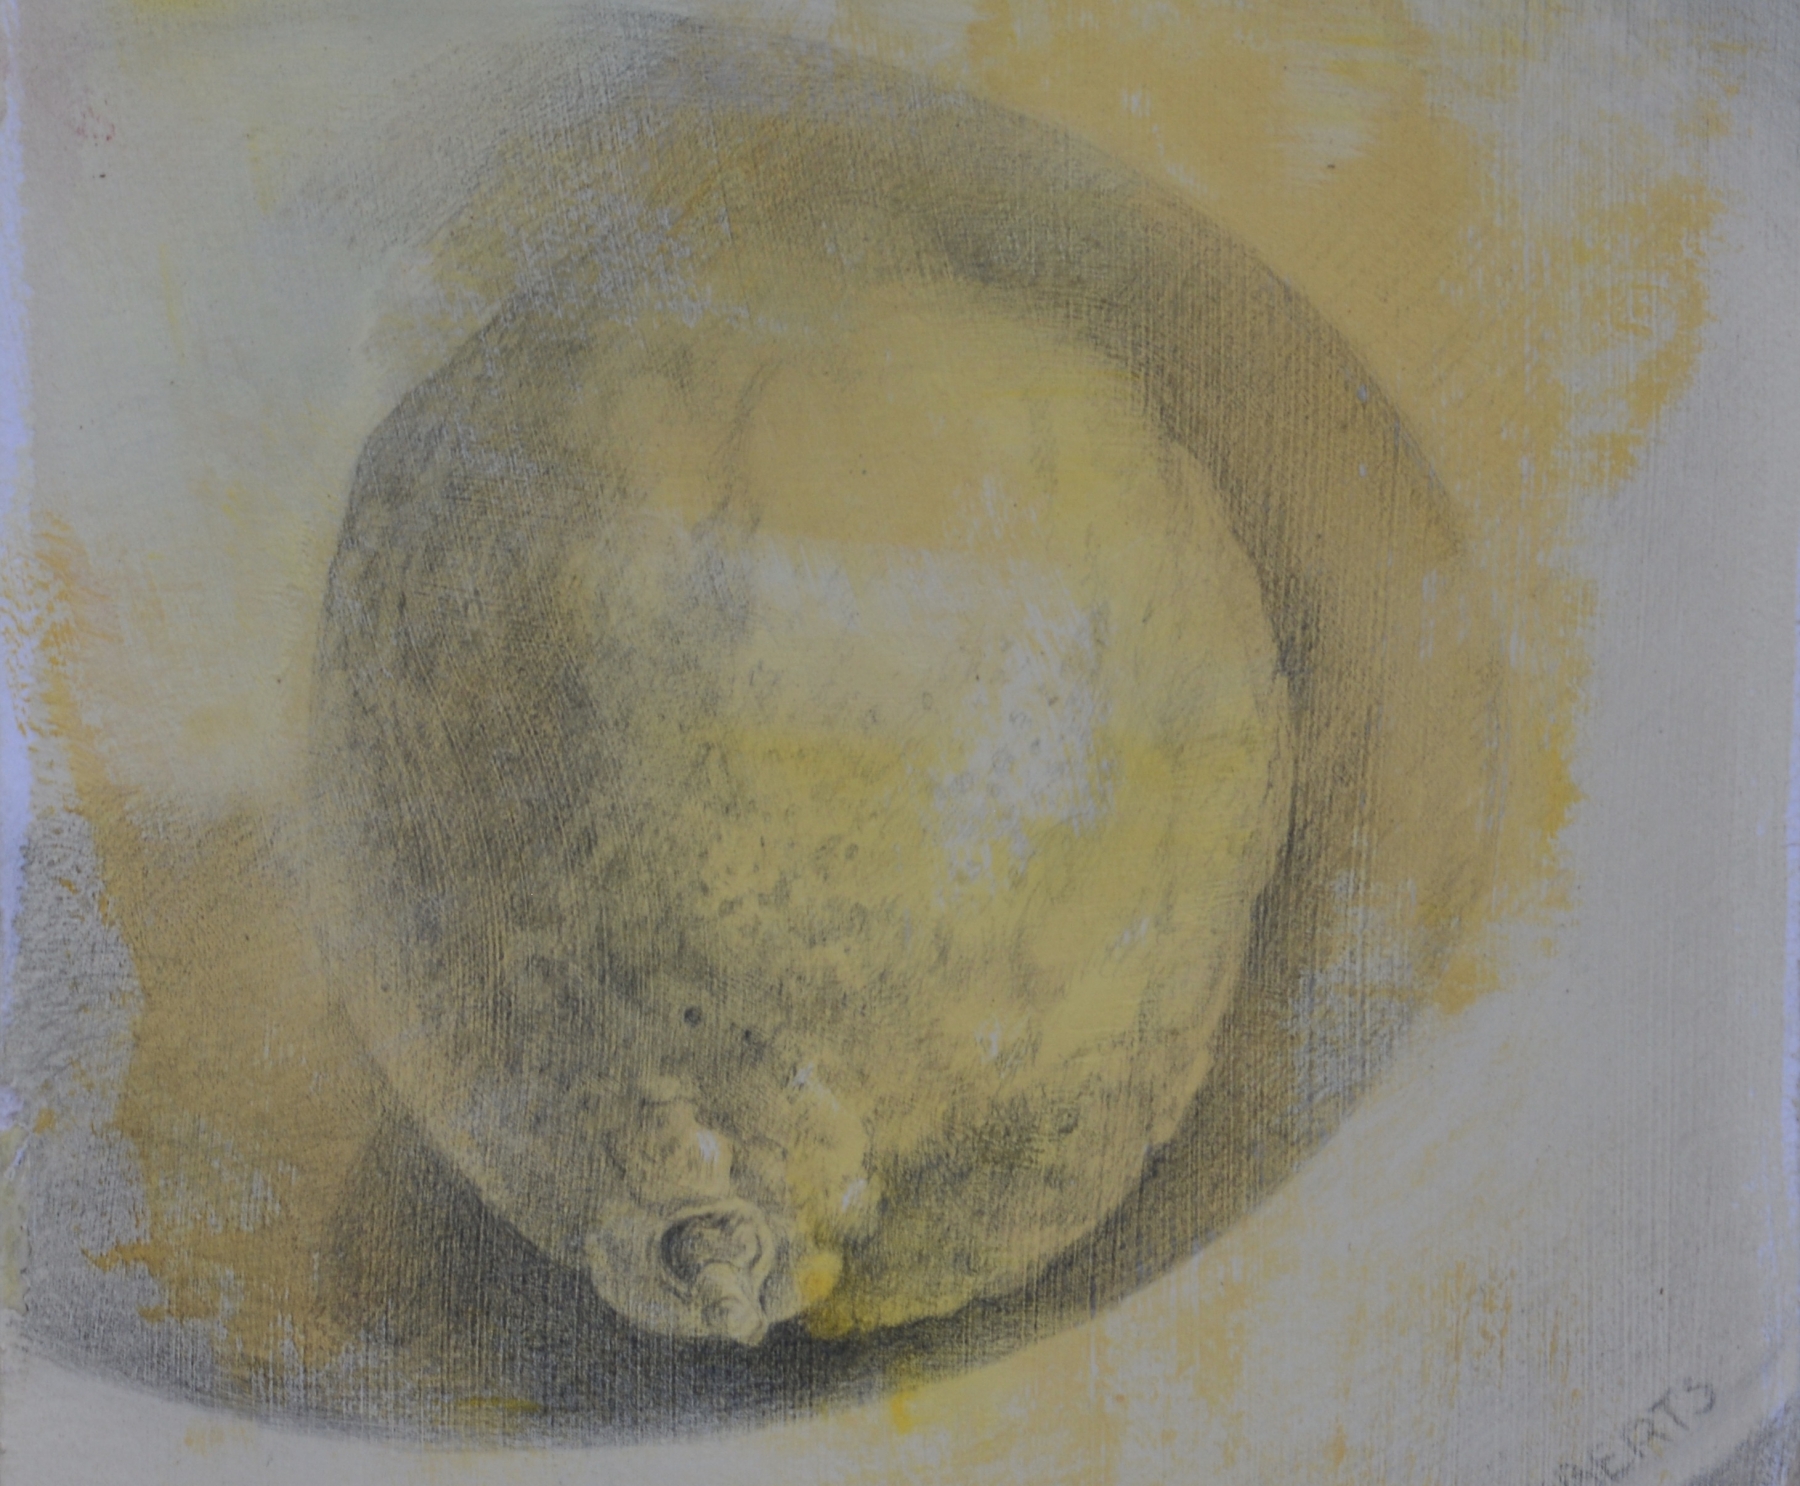 Lemon (Detail), 5.75" x 4.5", Silverpoint With Wash